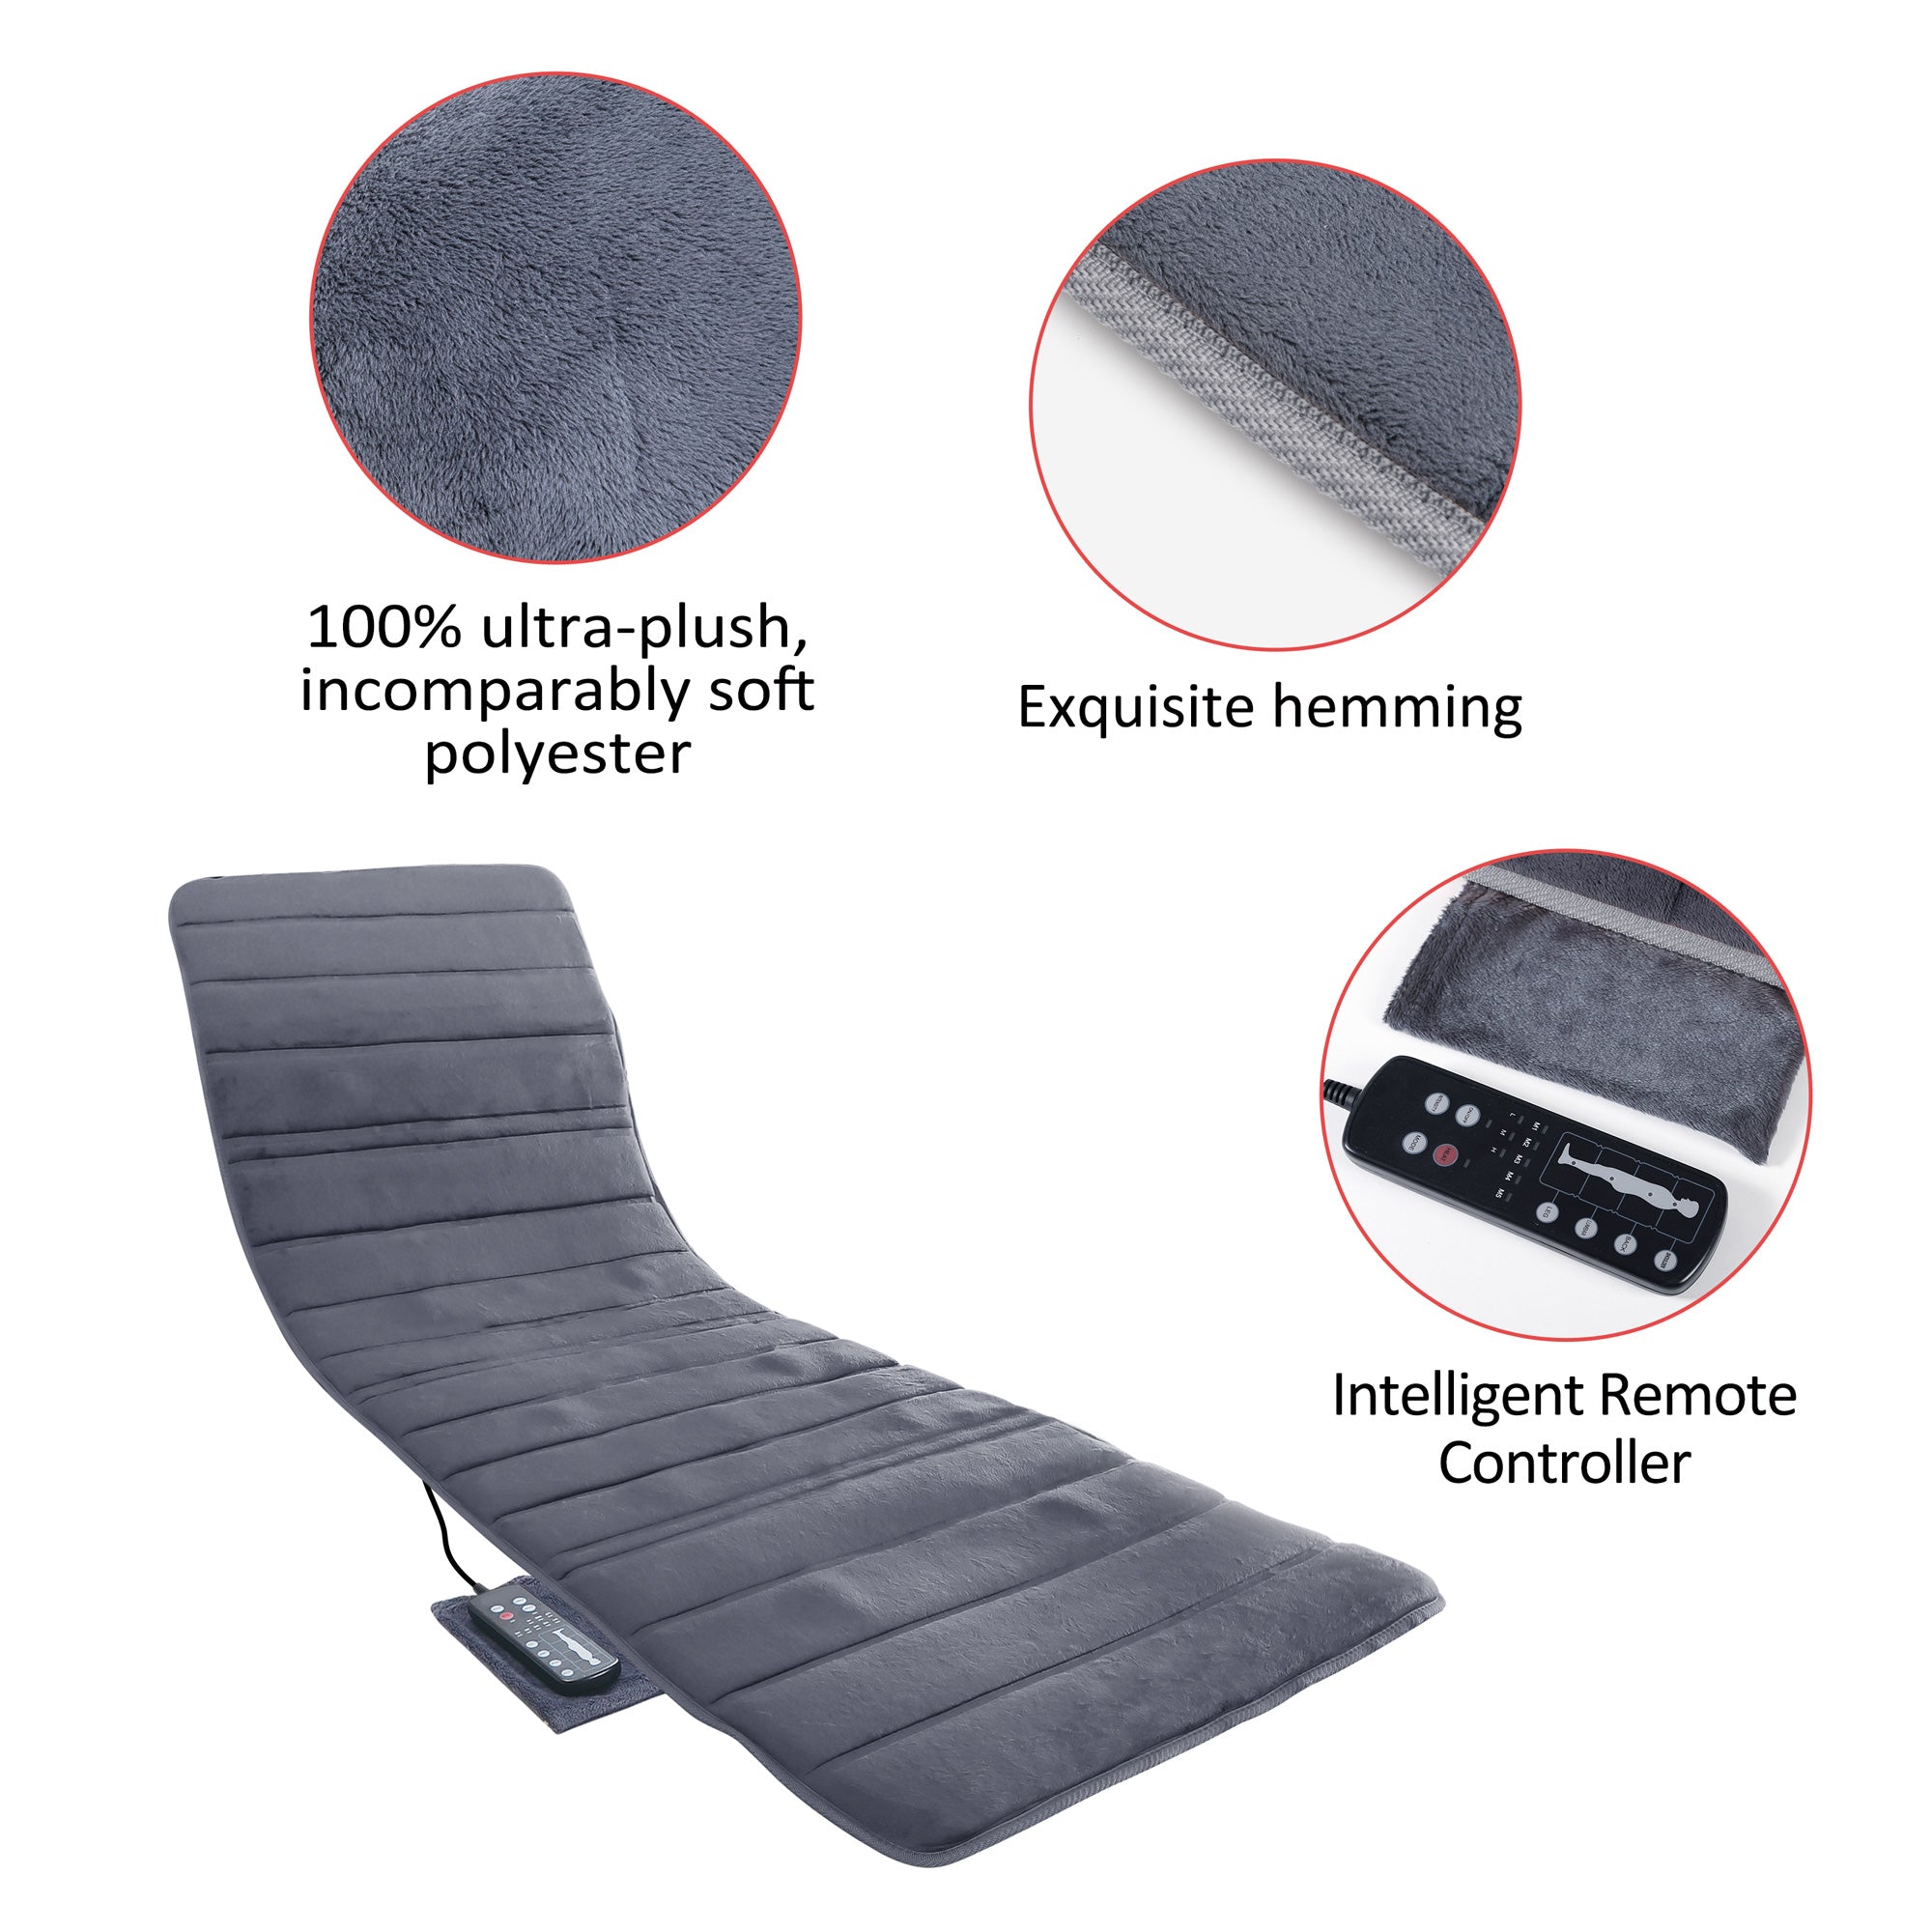 Comfier Full Body Massage Mat With Heat And Vibration Motors And 2 Therapy 9056